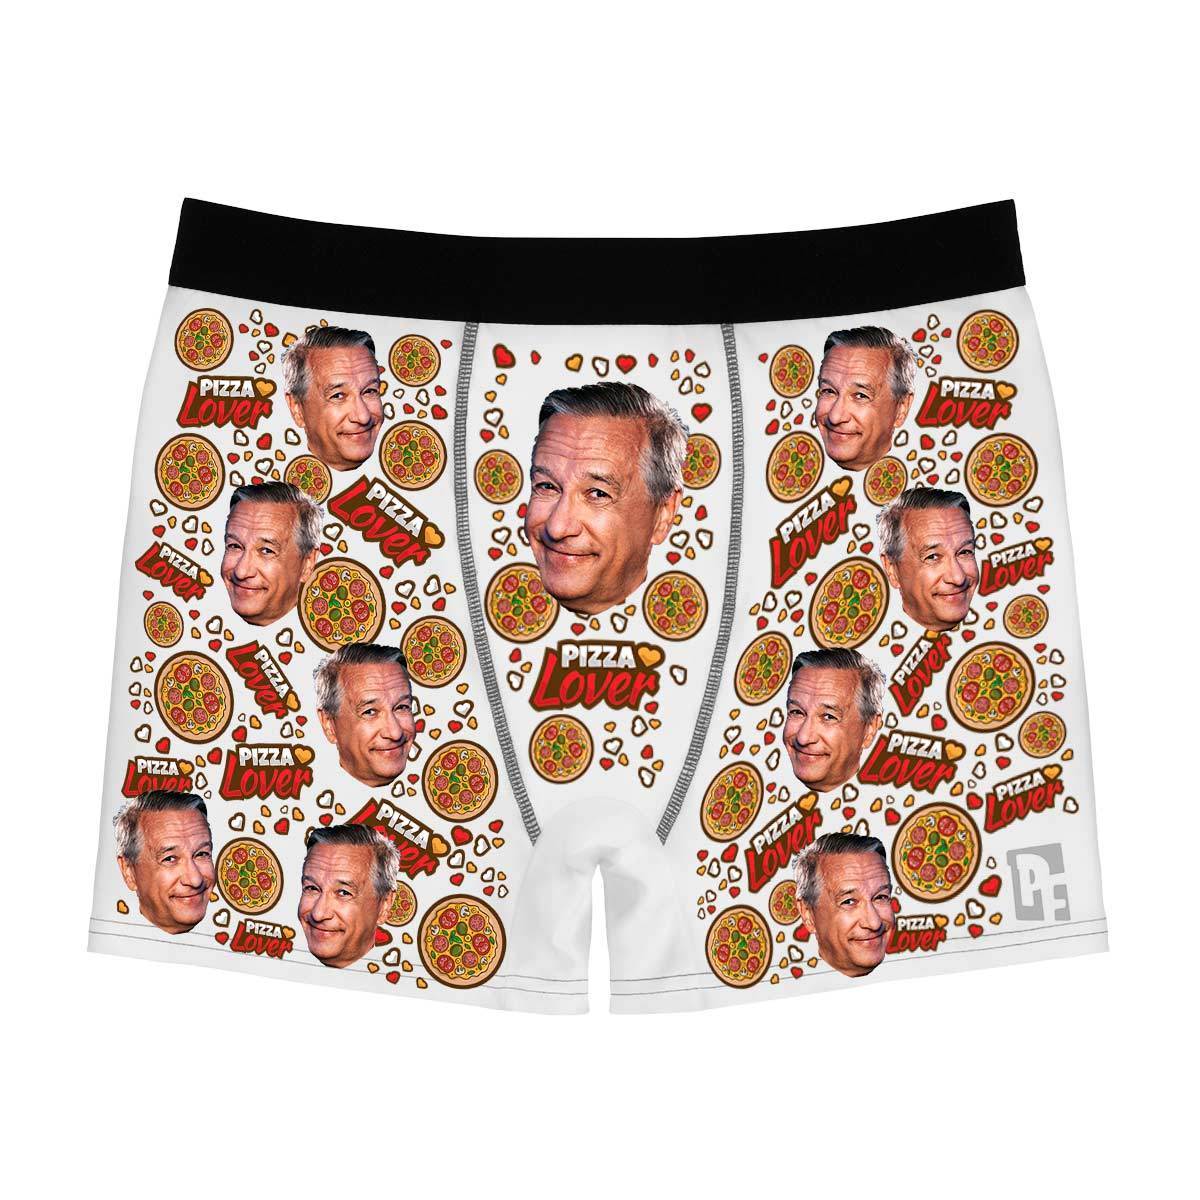 White Pizza Lover men's boxer briefs personalized with photo printed on them